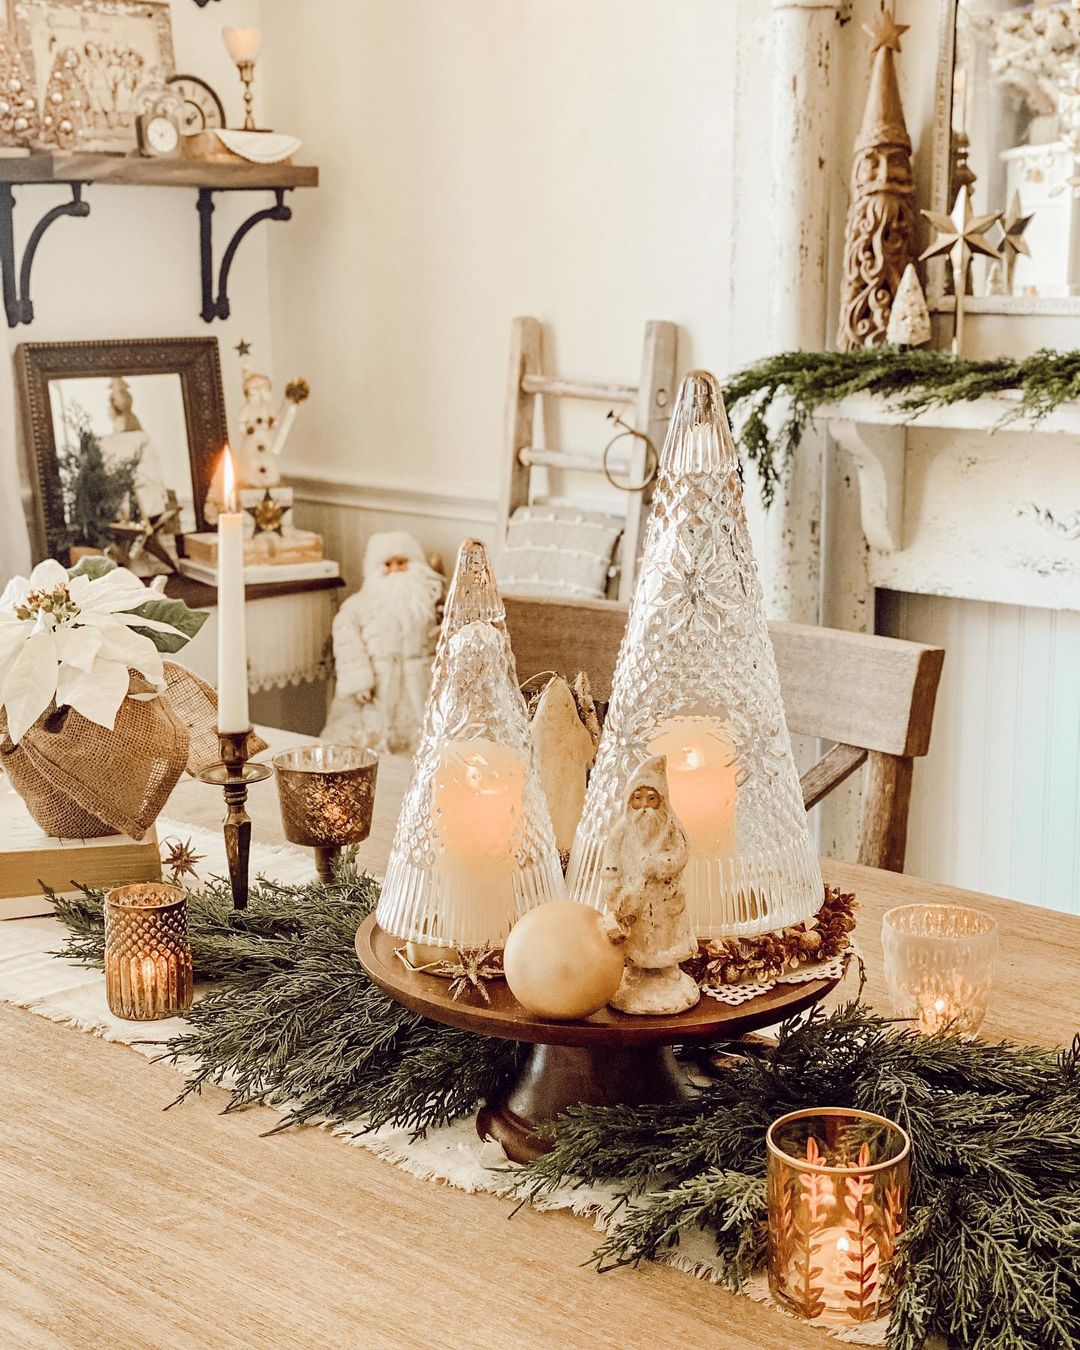 Rustic Christmas table with a crystal centerpiece surrounded by garland and candles on a wooden table. Photo by instagram user @courtneyfitzp01